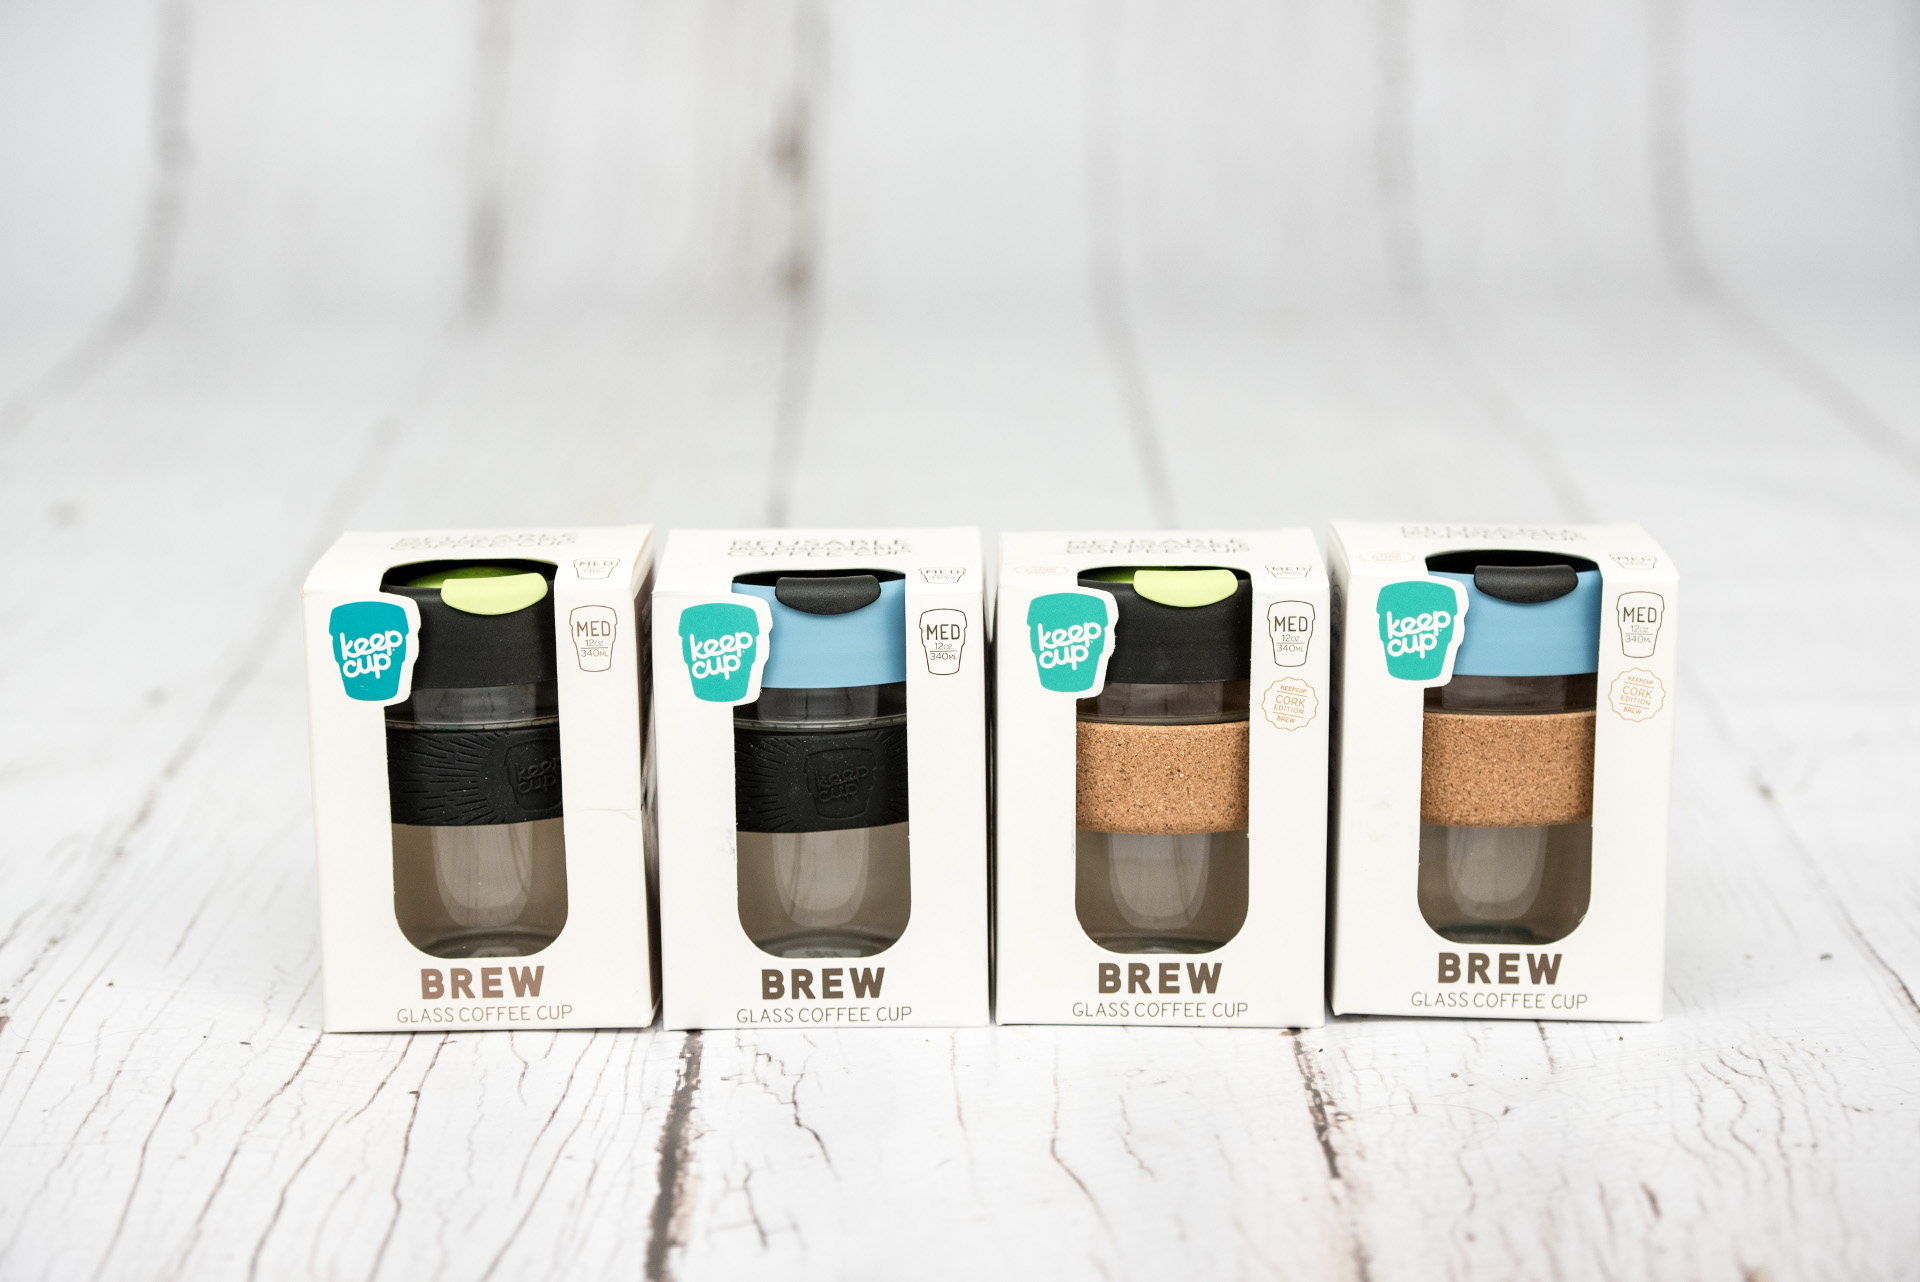 KeepCup Brew Reusable Glass Cup in Black 12oz